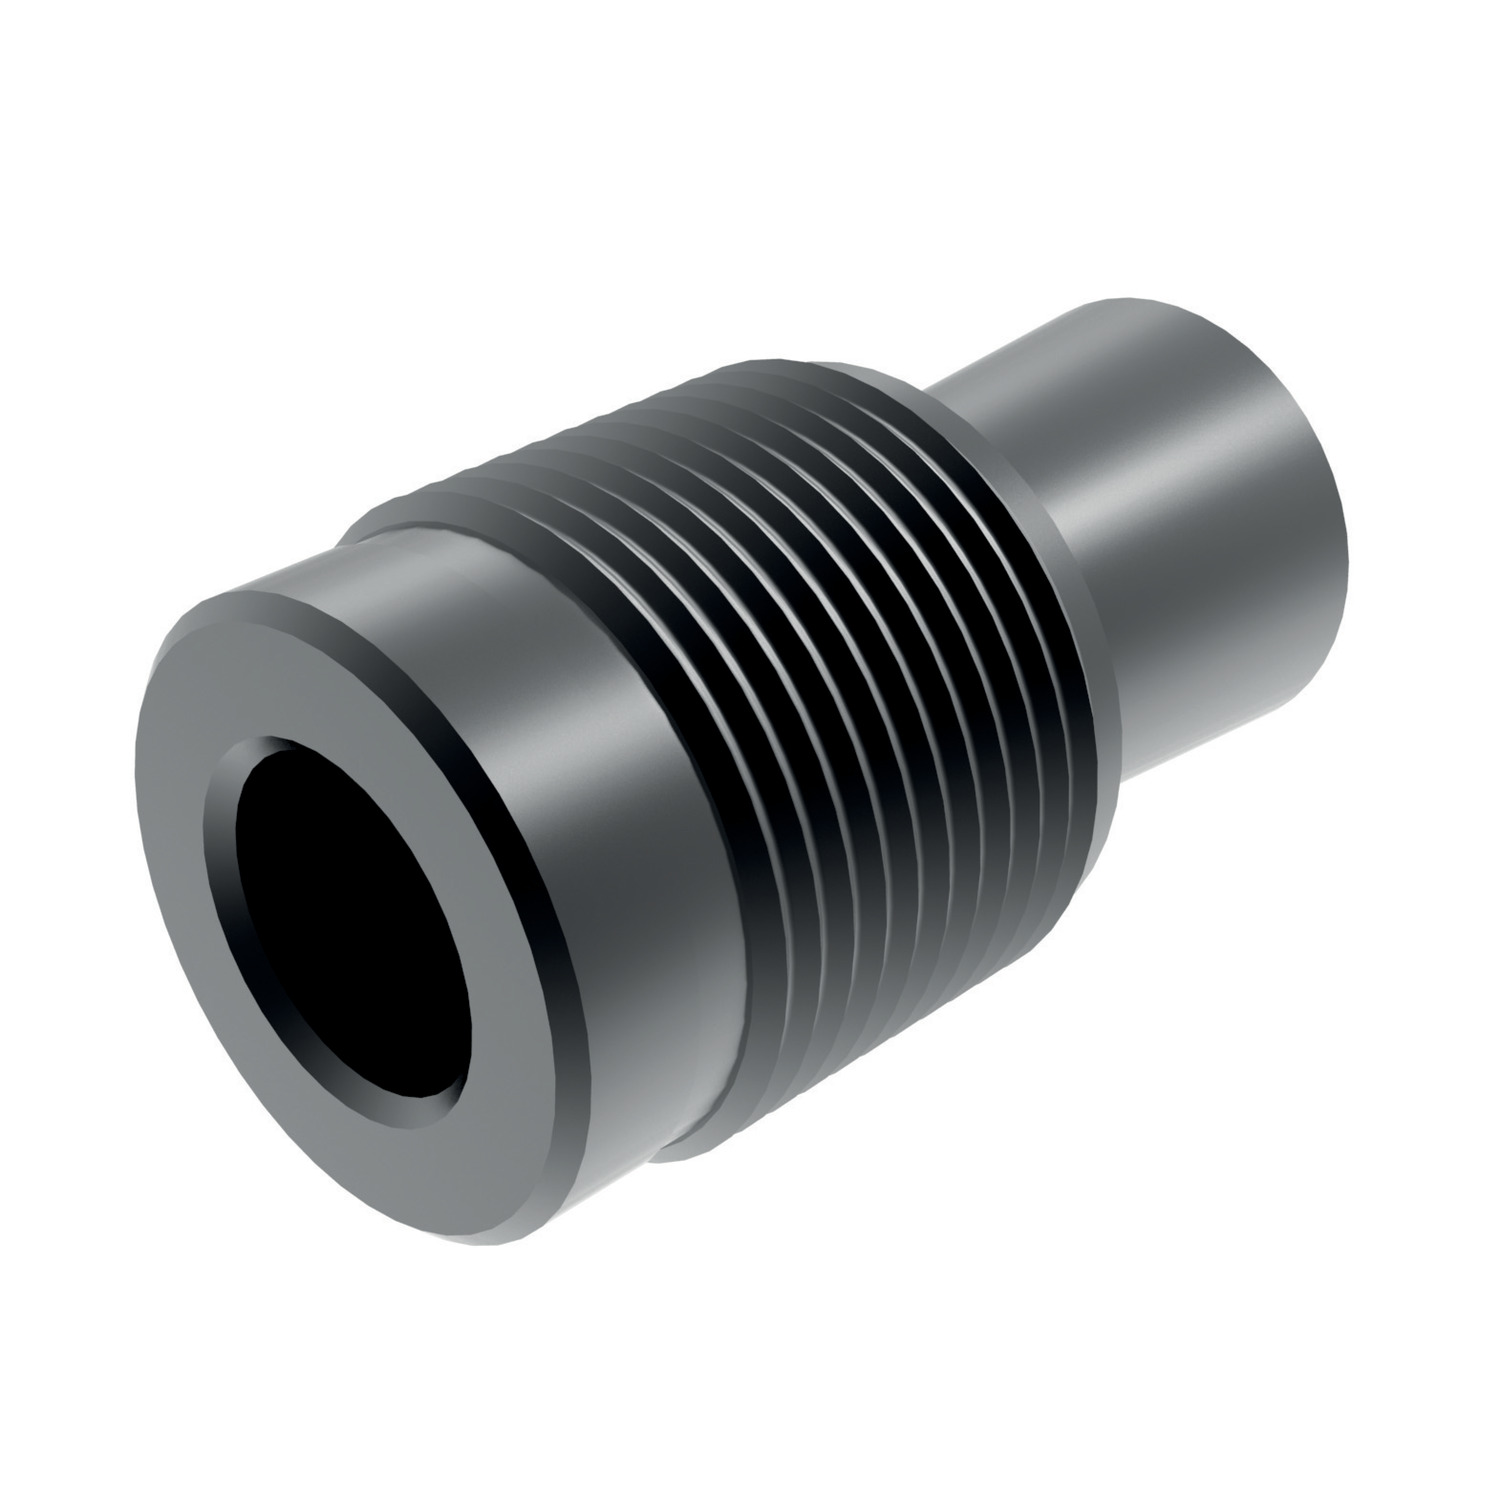 Pull Plug Restrictors Pull plug restrictors. With through bore to reduce flow rates. Steel, case-hardened.